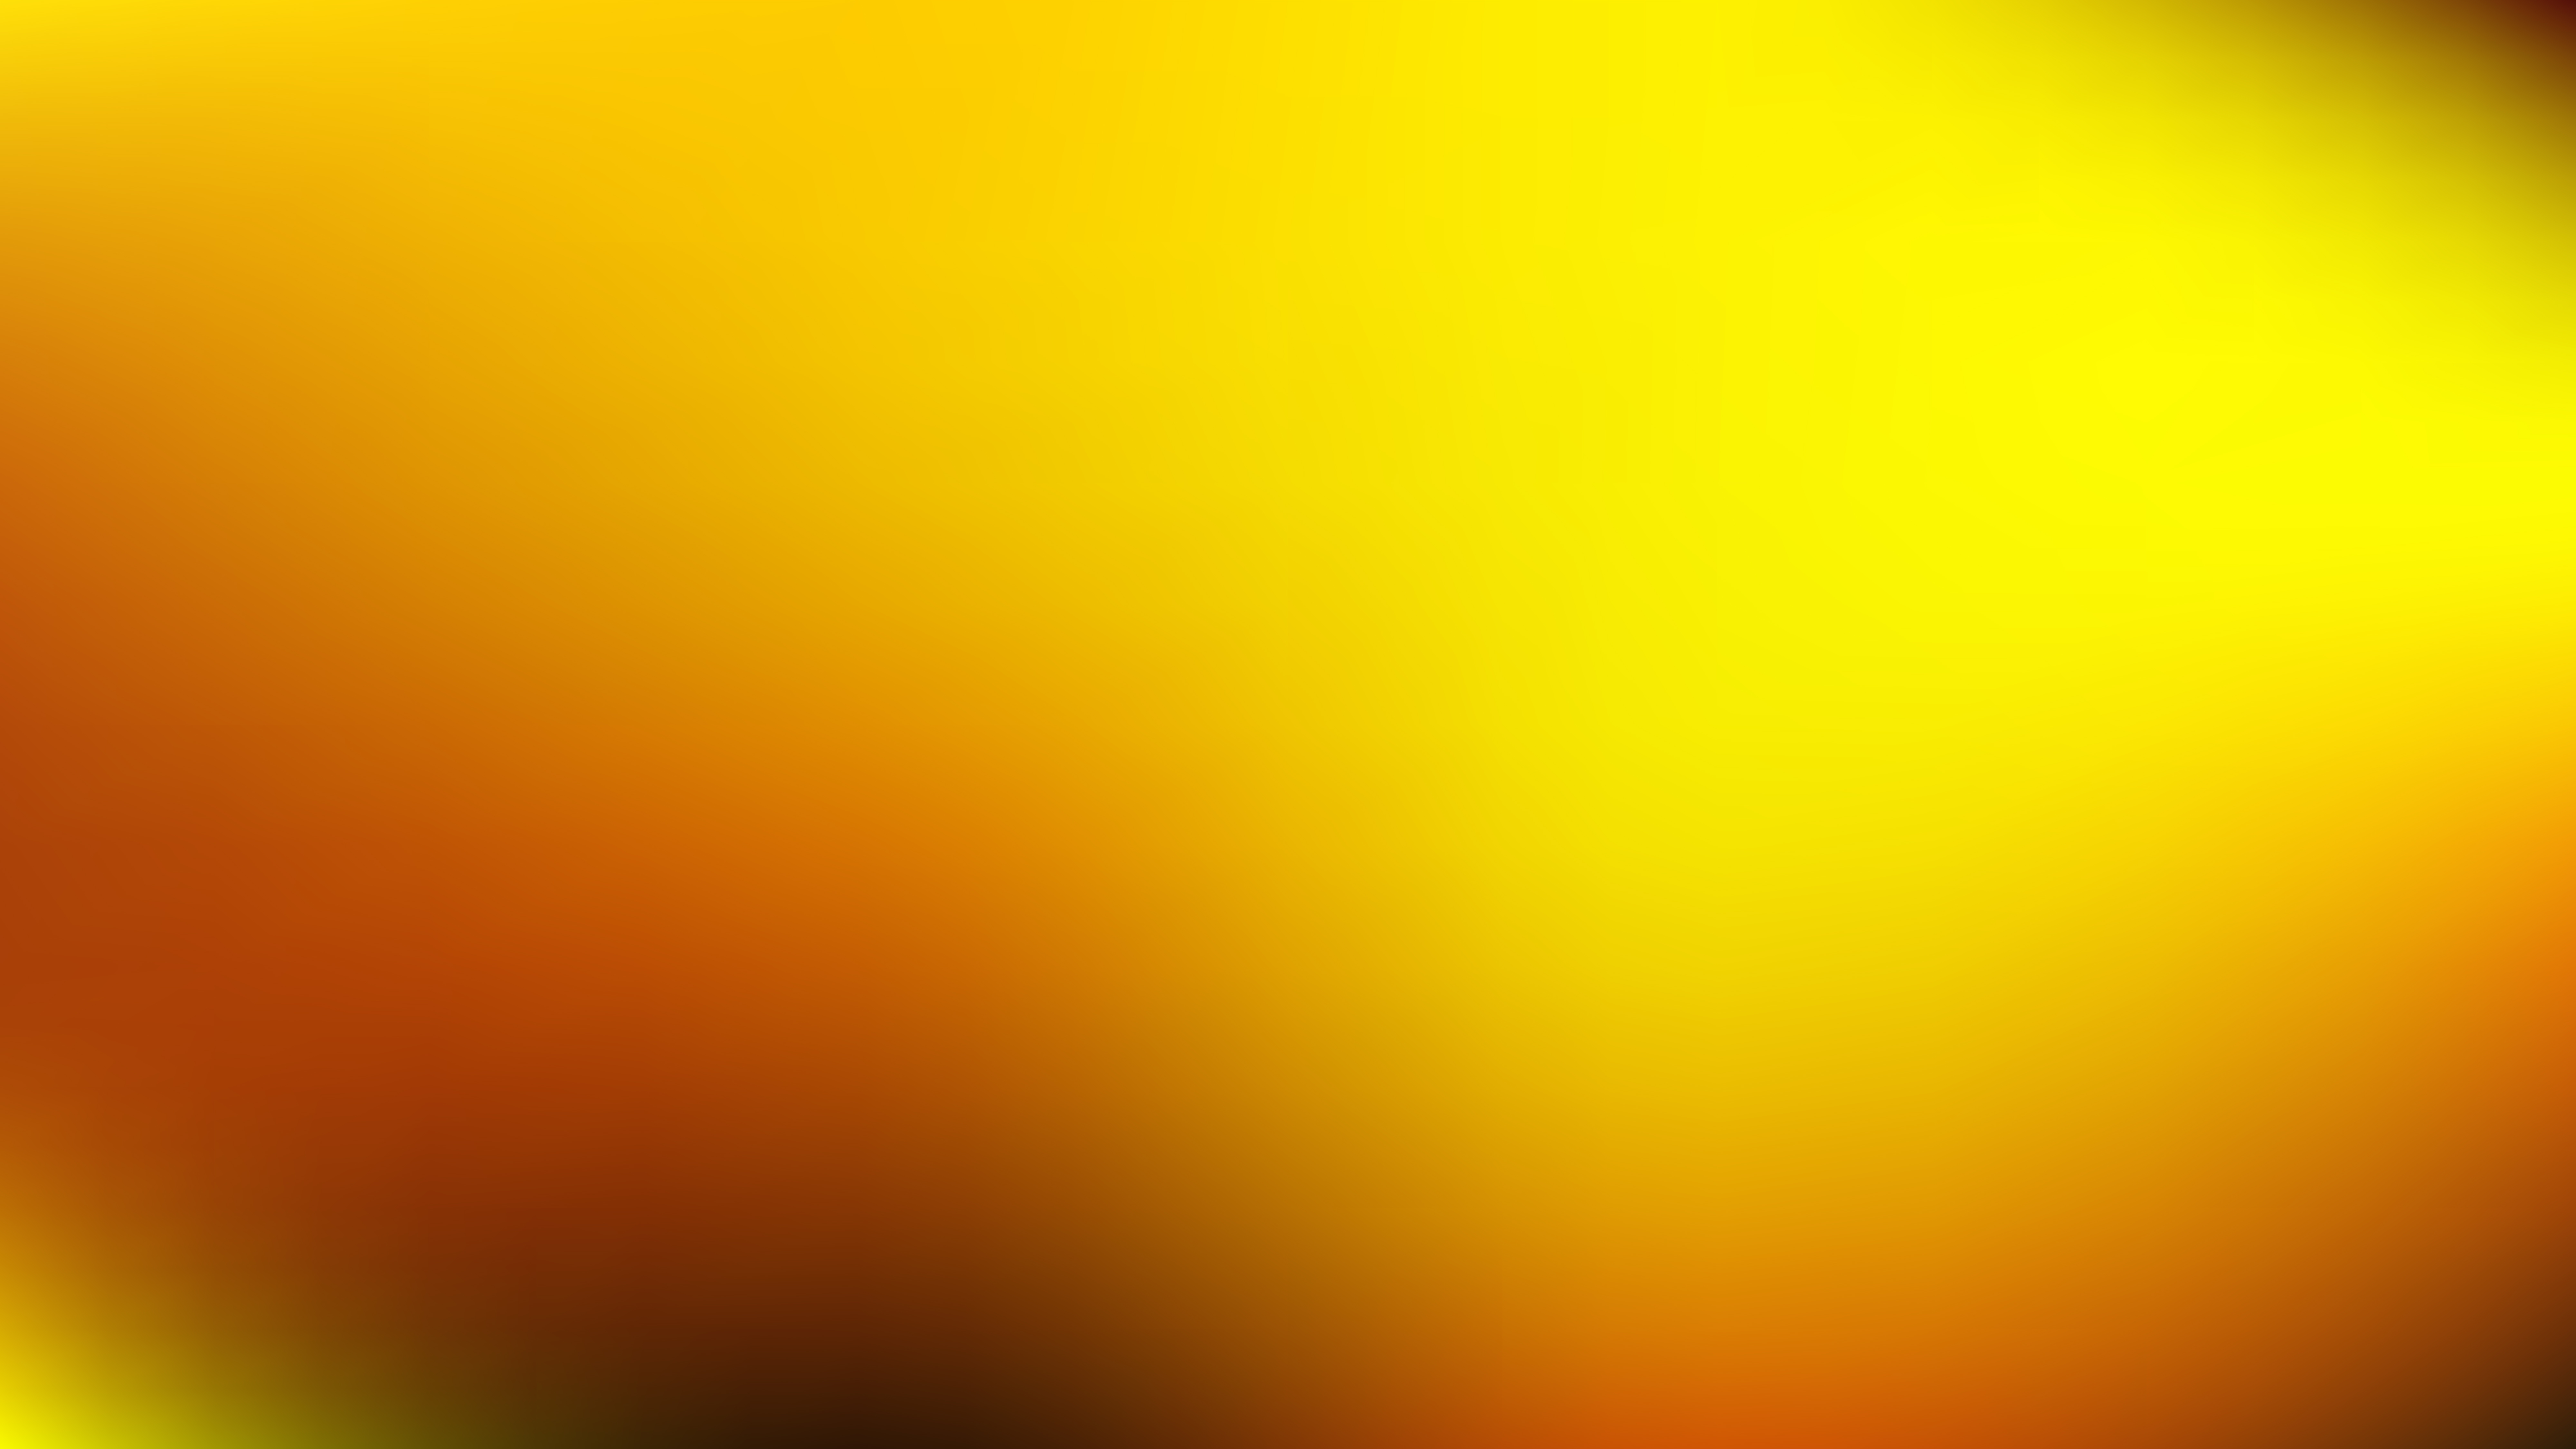 Free Red and Yellow Professional PowerPoint Background Vector